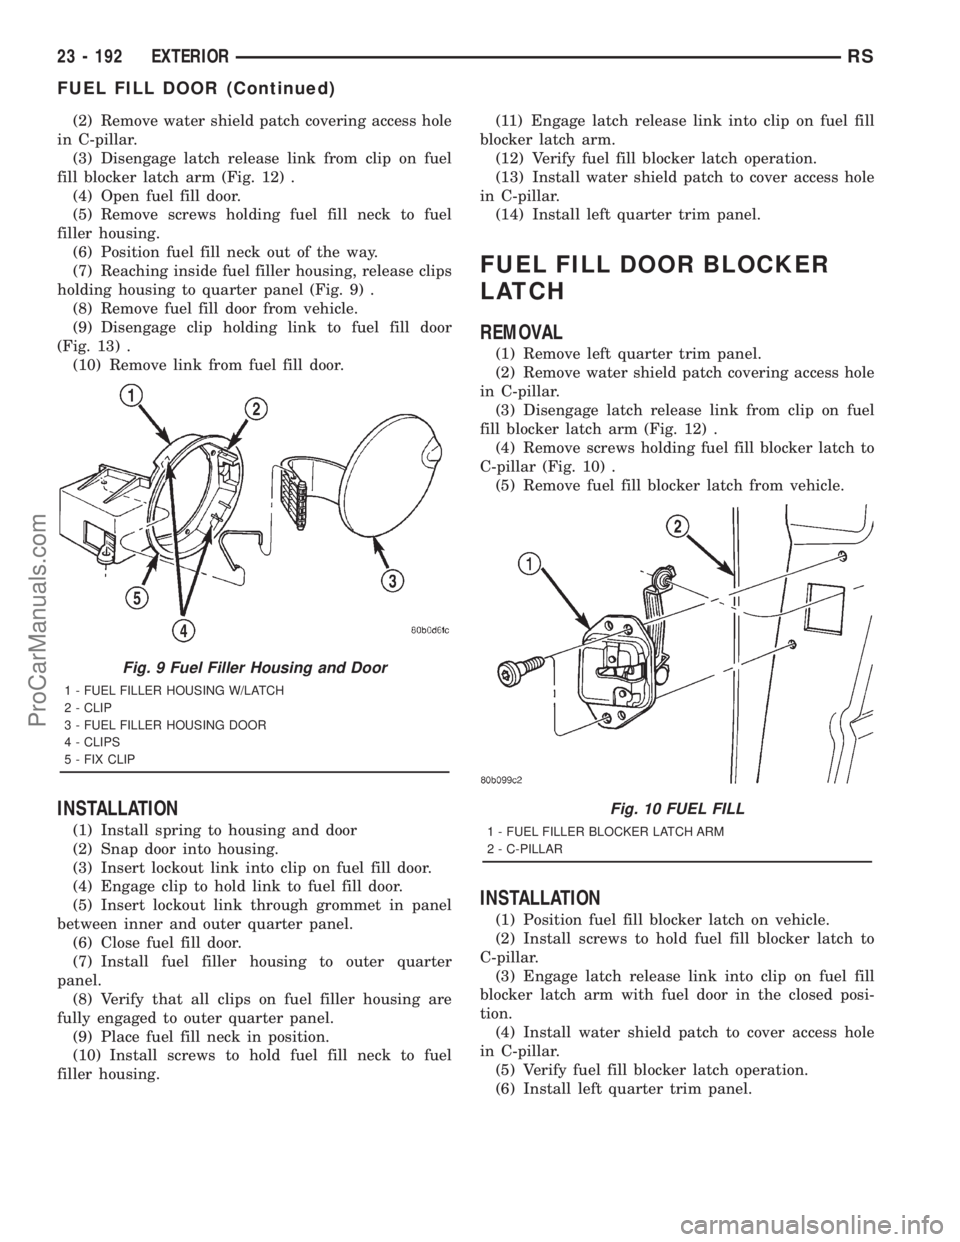 DODGE TOWN AND COUNTRY 2001  Service Manual (2) Remove water shield patch covering access hole
in C-pillar.
(3) Disengage latch release link from clip on fuel
fill blocker latch arm (Fig. 12) .
(4) Open fuel fill door.
(5) Remove screws holding